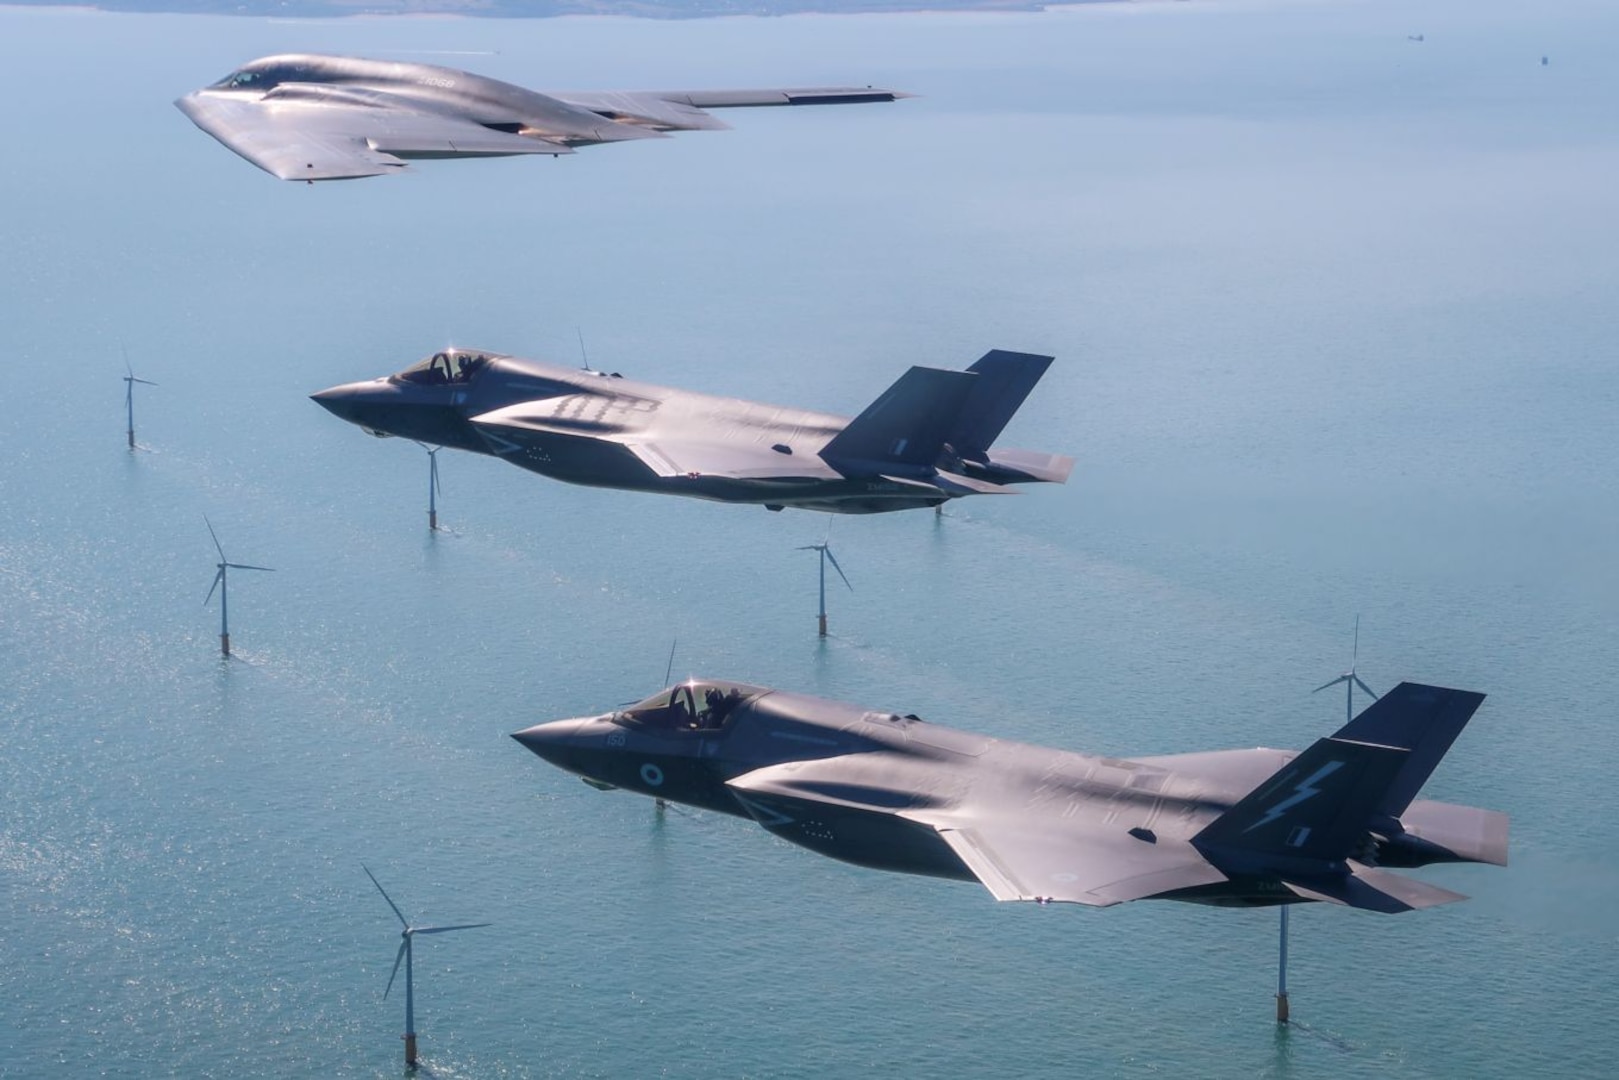 A U.S. Air Force B-2 Spirit, currently deployed to RAF Fairford in Gloucestershire, England, flies above the English countryside near Dover with two RAF F-35 jets. This is the first time UK F-35s have conducted training with the stealth bomber.